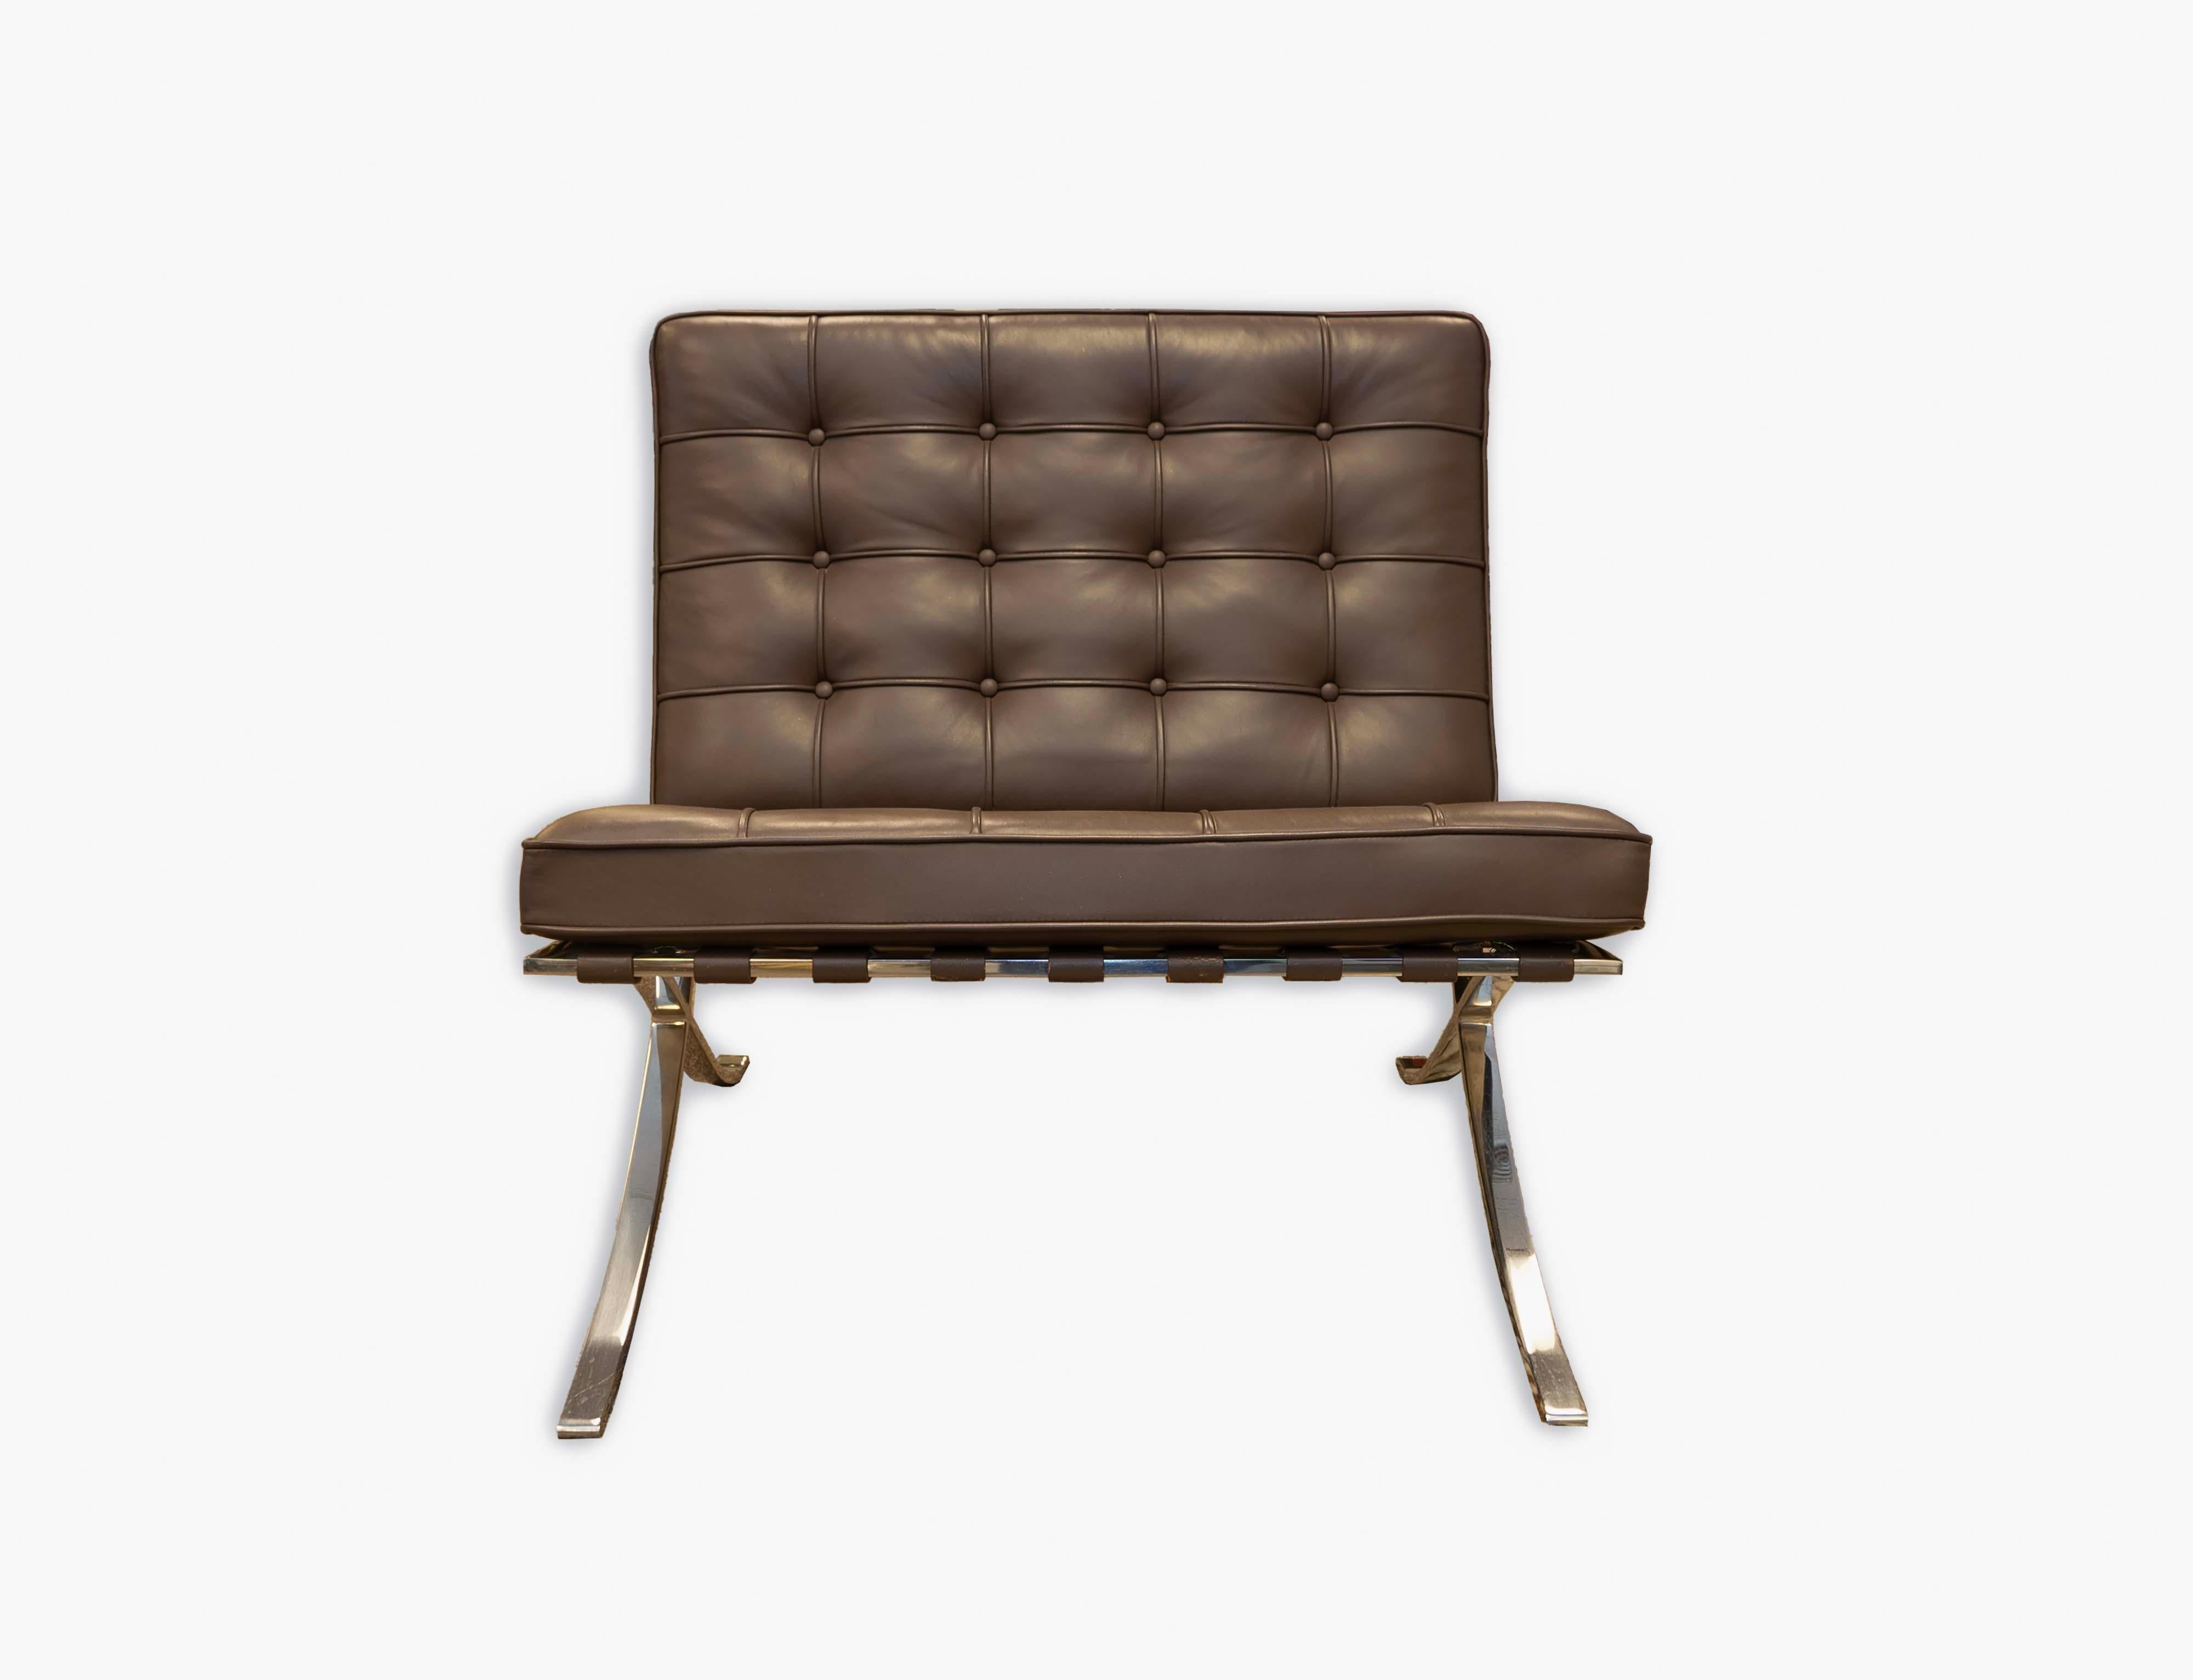 Experience the epitome of timeless elegance with this authentic Mid Century Modern Barcelona Chair, designed by Mies Van Der Rohe for Knoll. Crafted with sumptuous brown leather and signature tufting, this piece not only serves as a luxurious